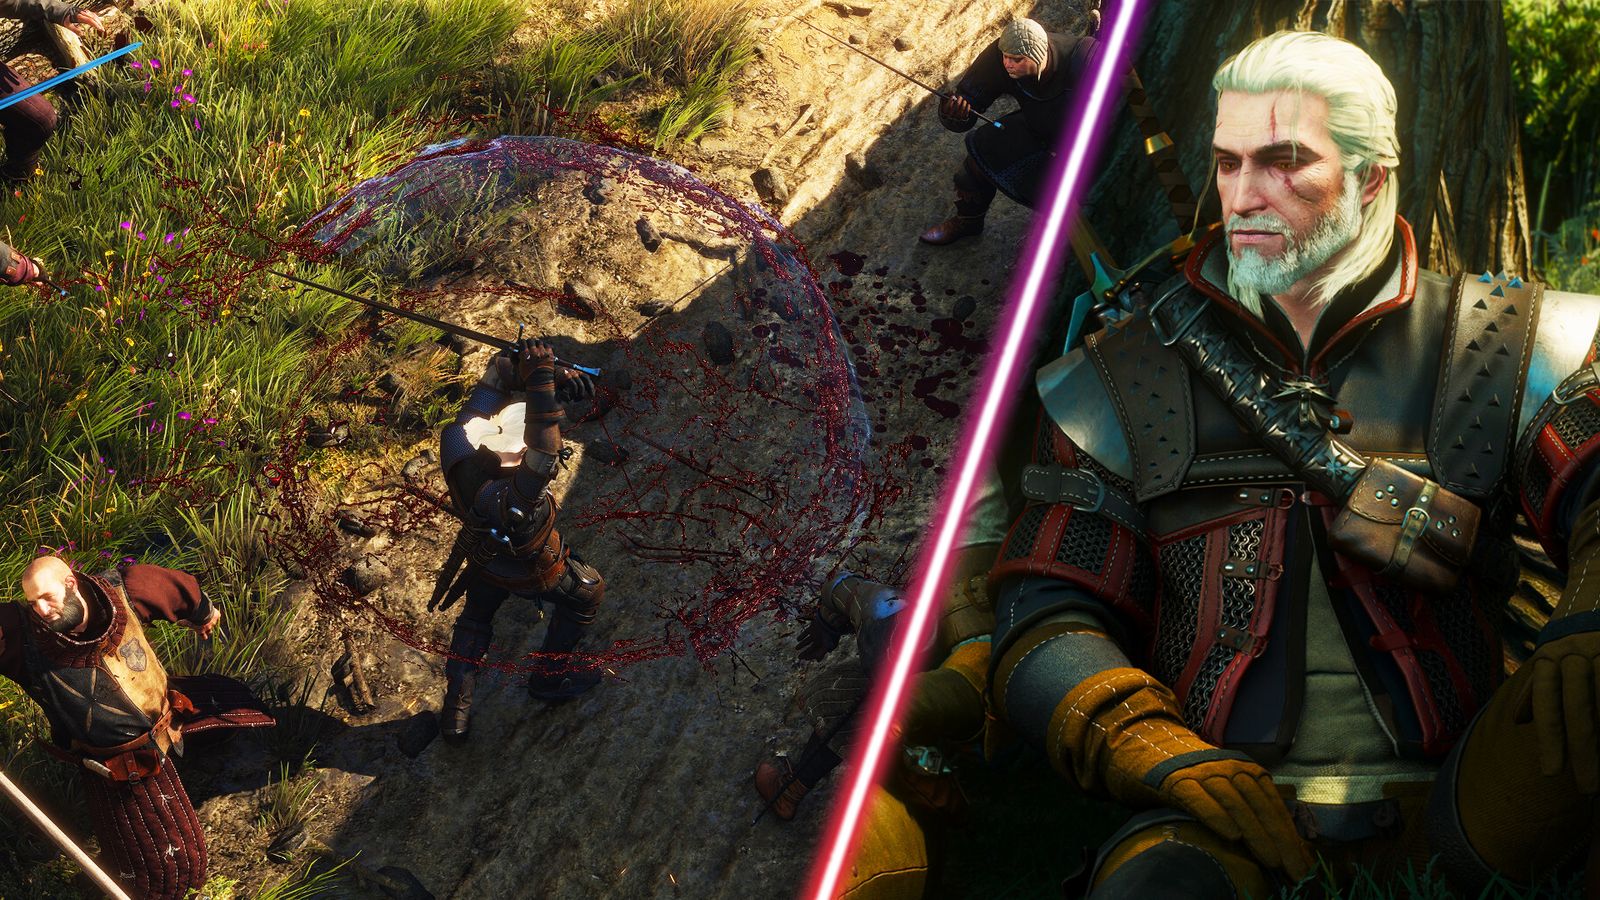 Geralt creating some blood trails in The Witcher 3.